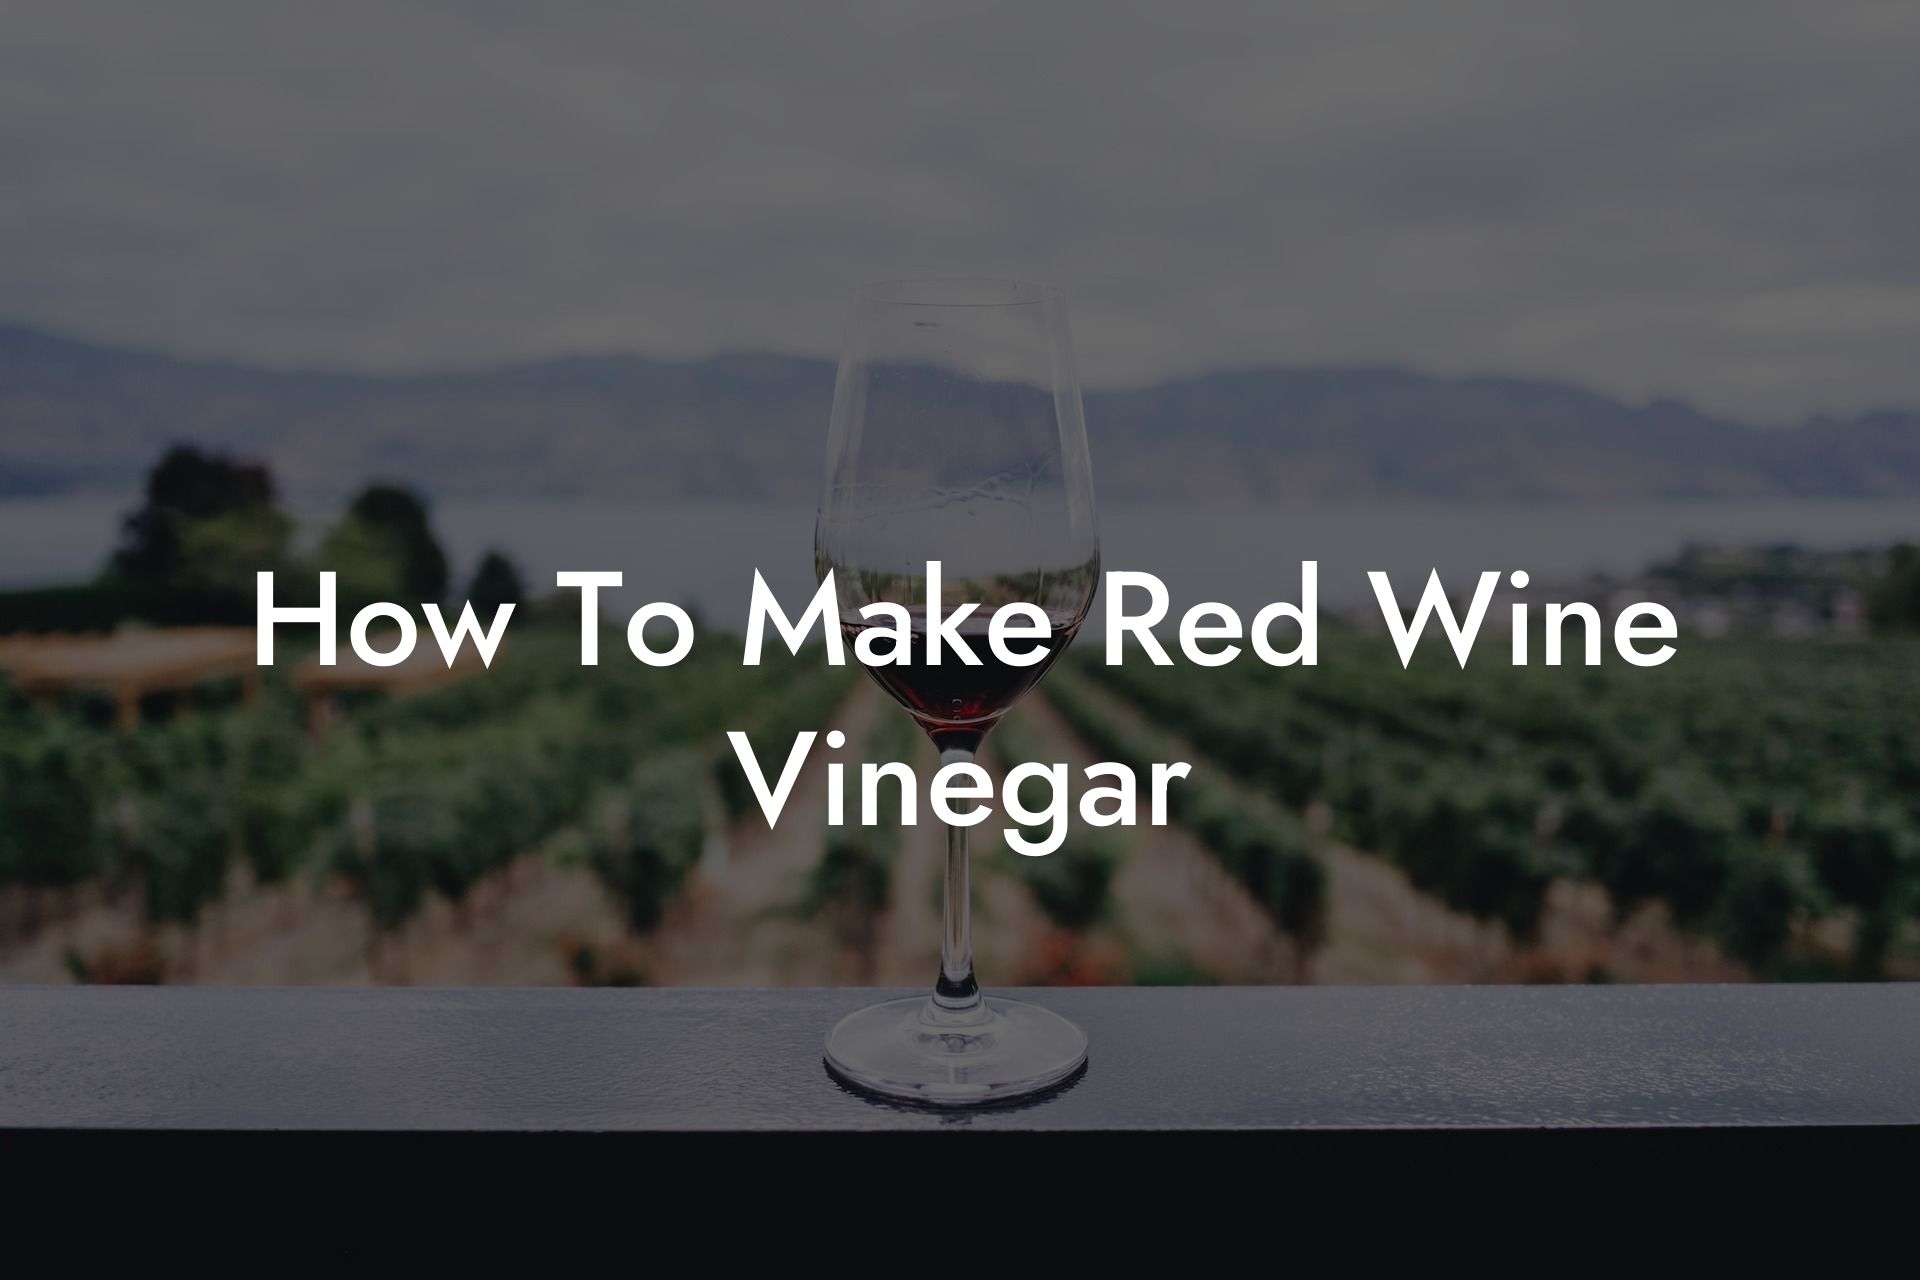 How To Make Red Wine Vinegar